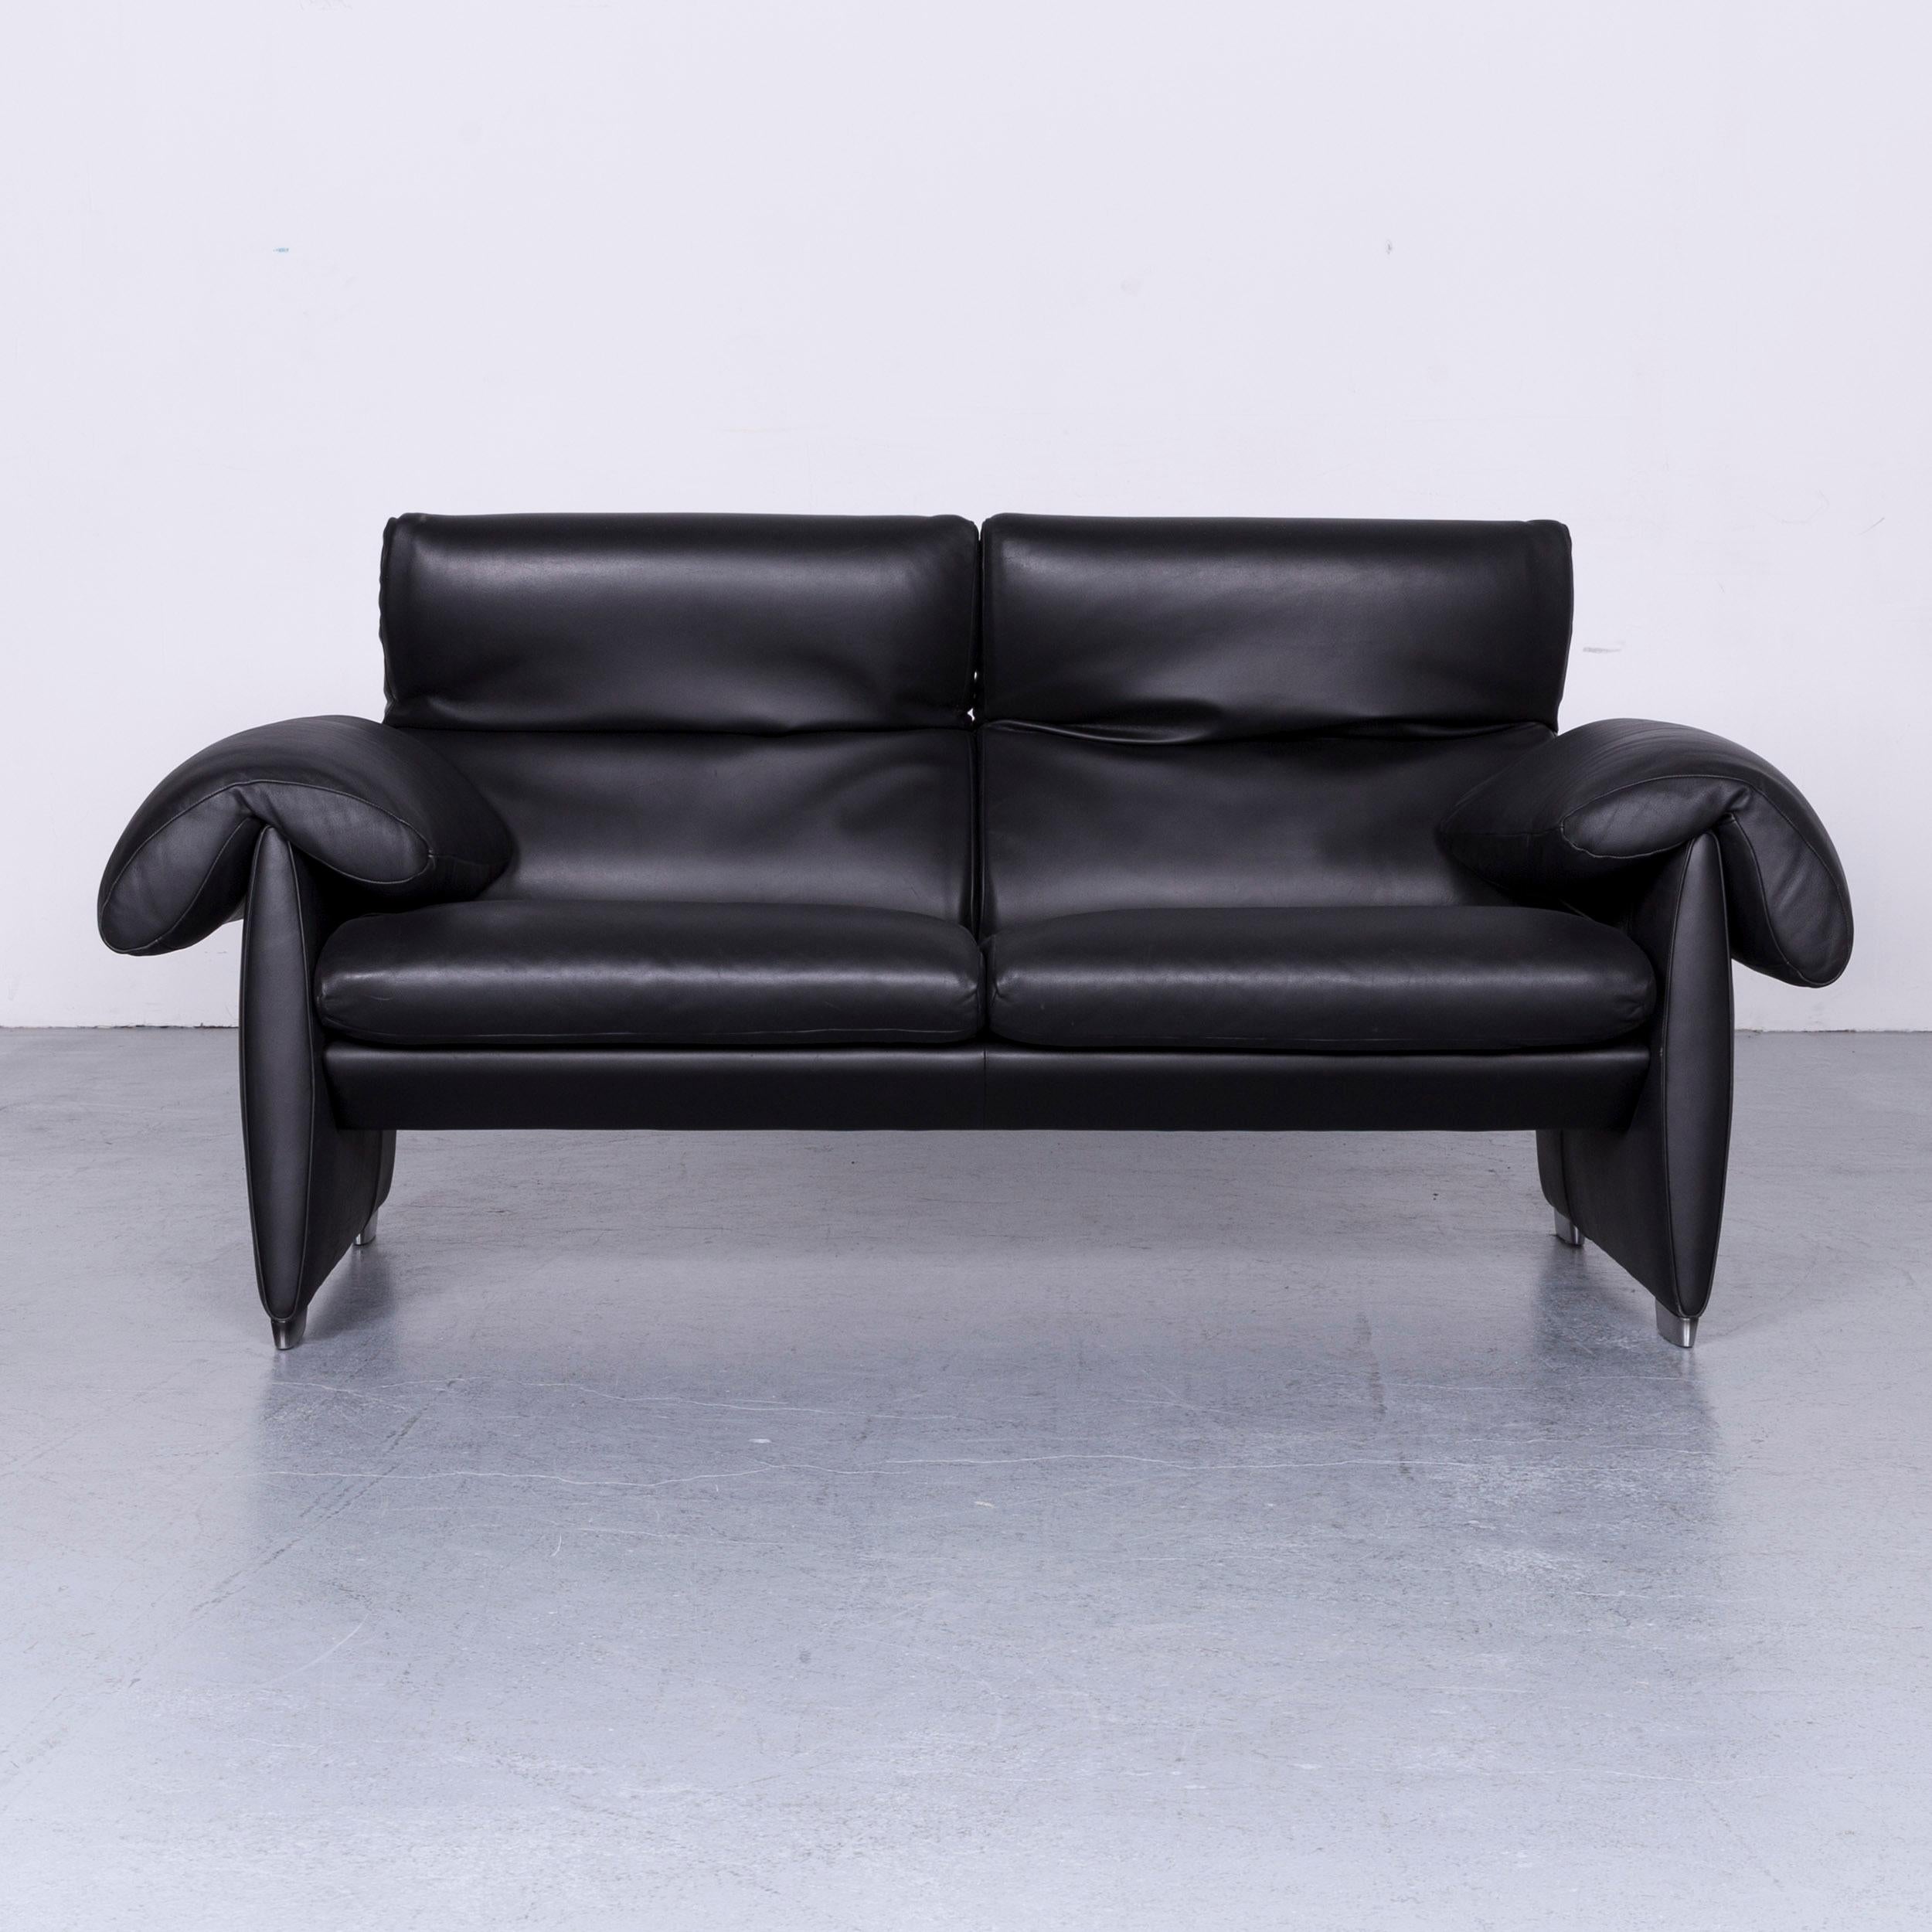 De Sede DS 10 Designer Sofa Black Leather Three-Seat Two-Seat Set Couch 7